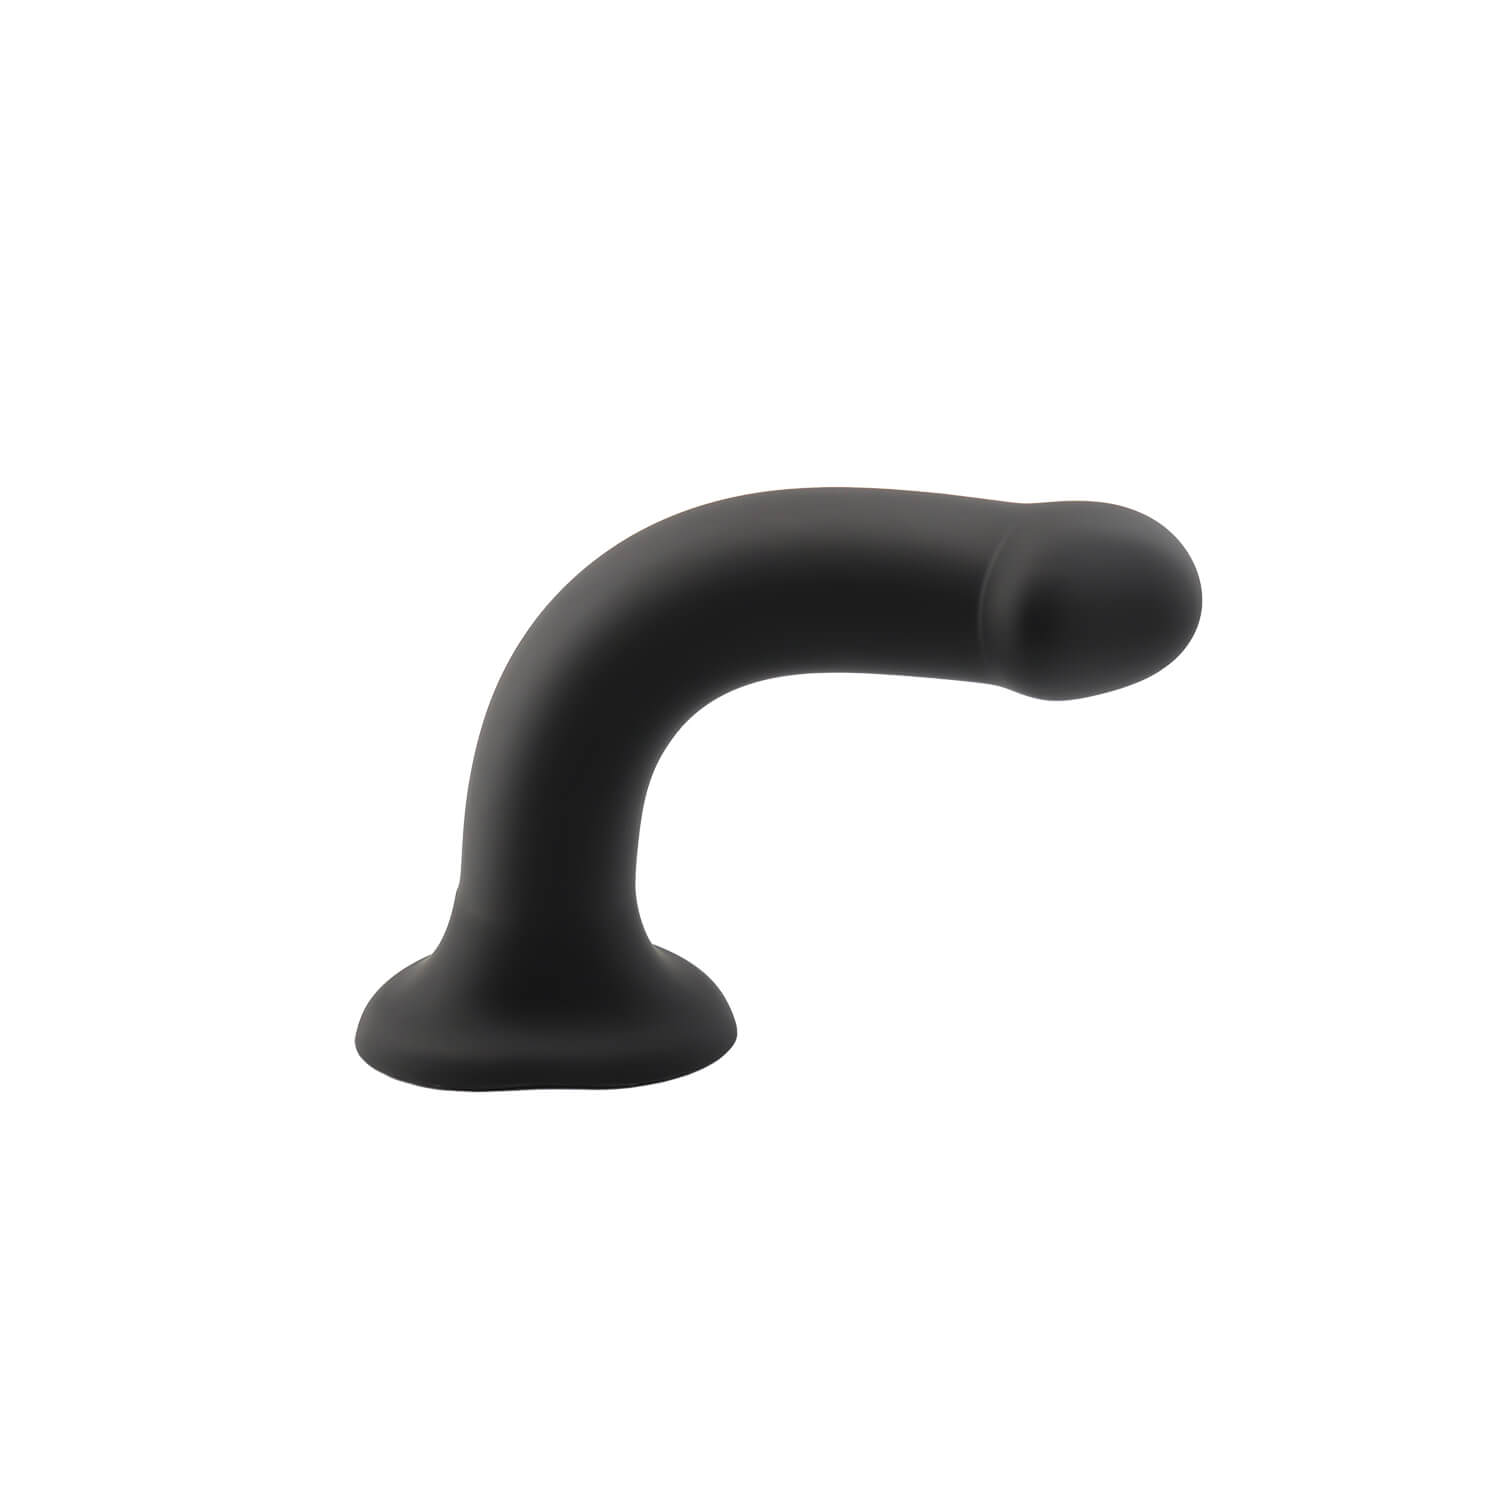 flexible curved dildo with black color